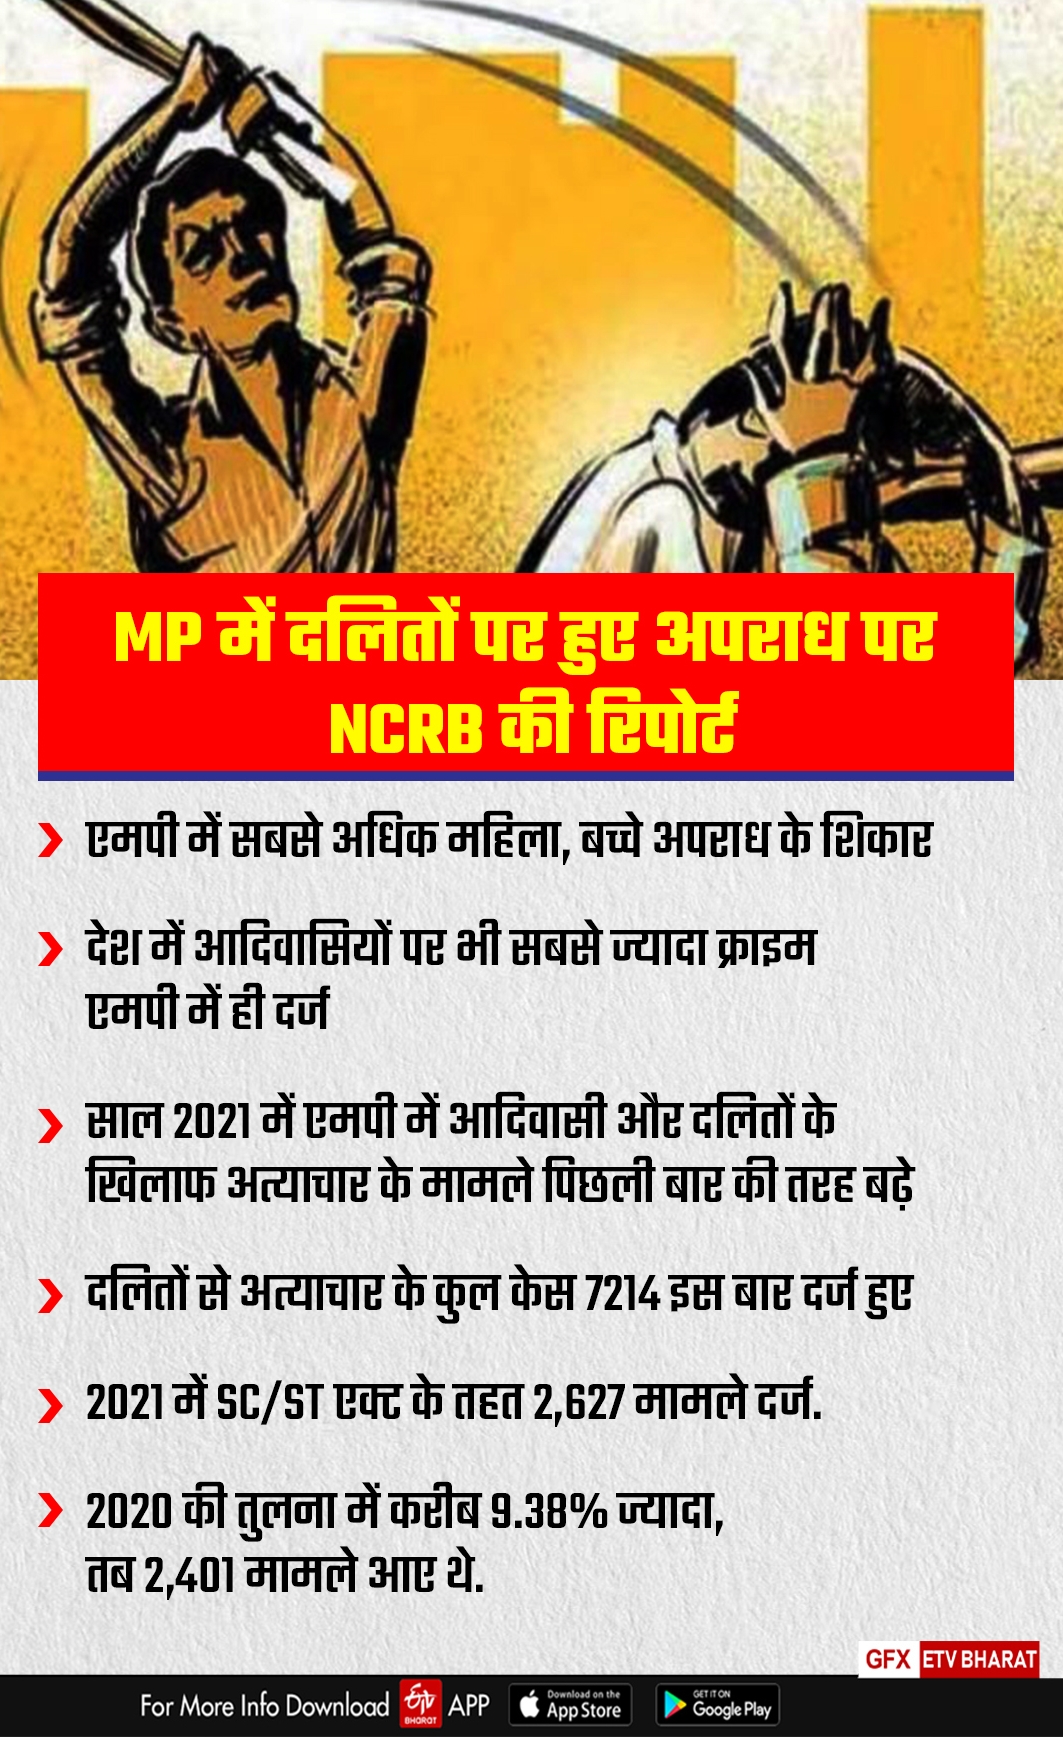 NCRB report mp